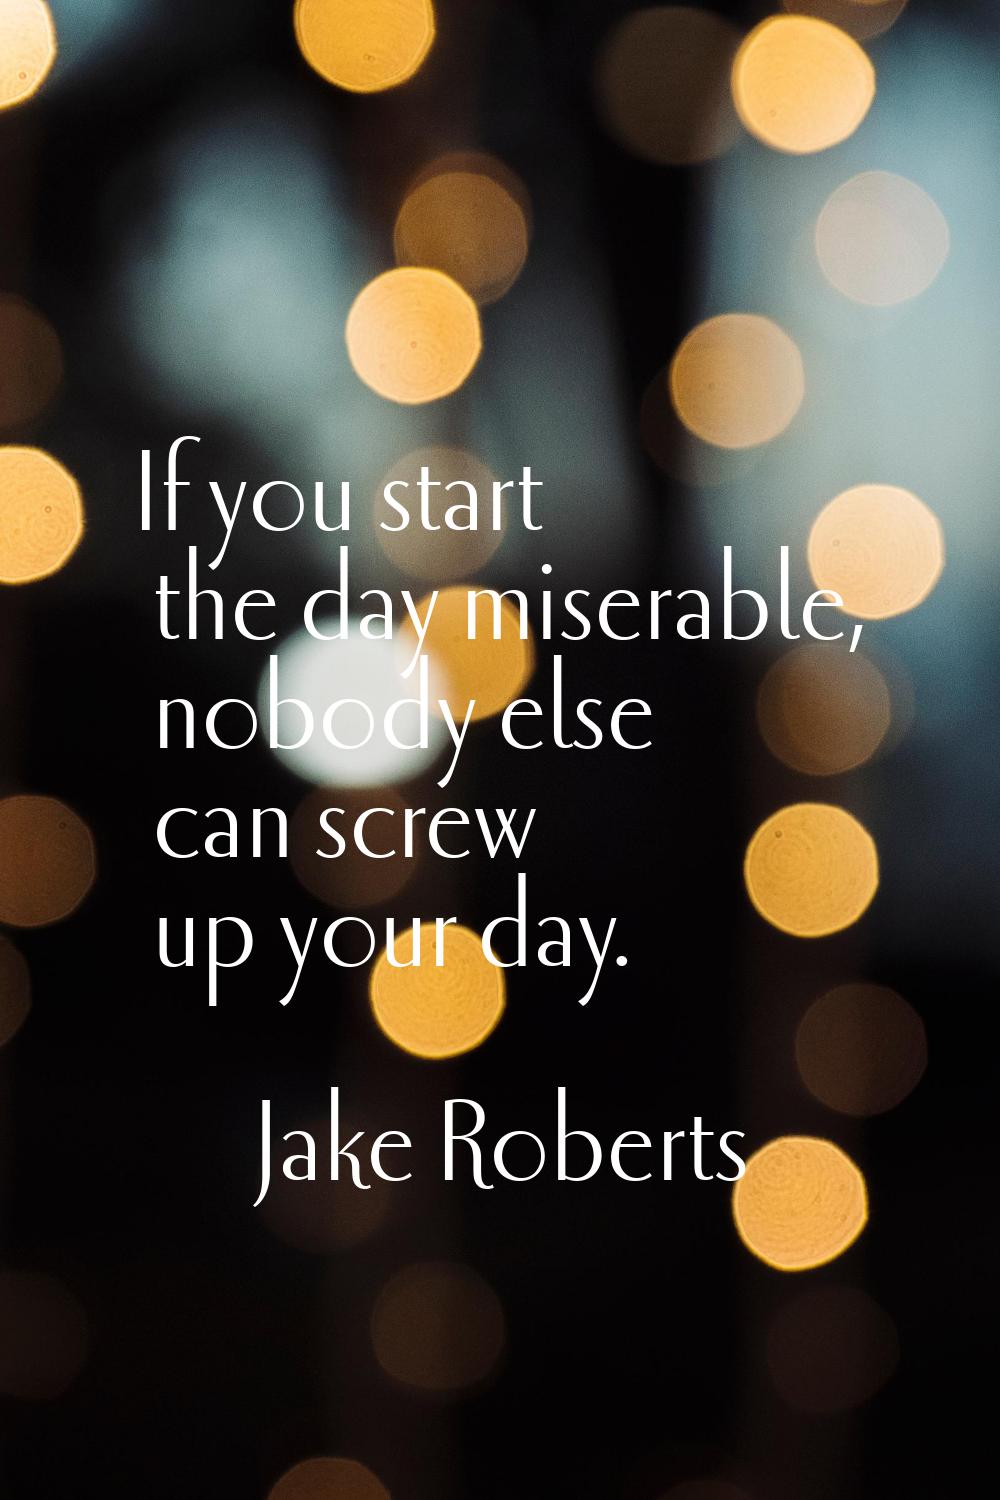 If you start the day miserable, nobody else can screw up your day.